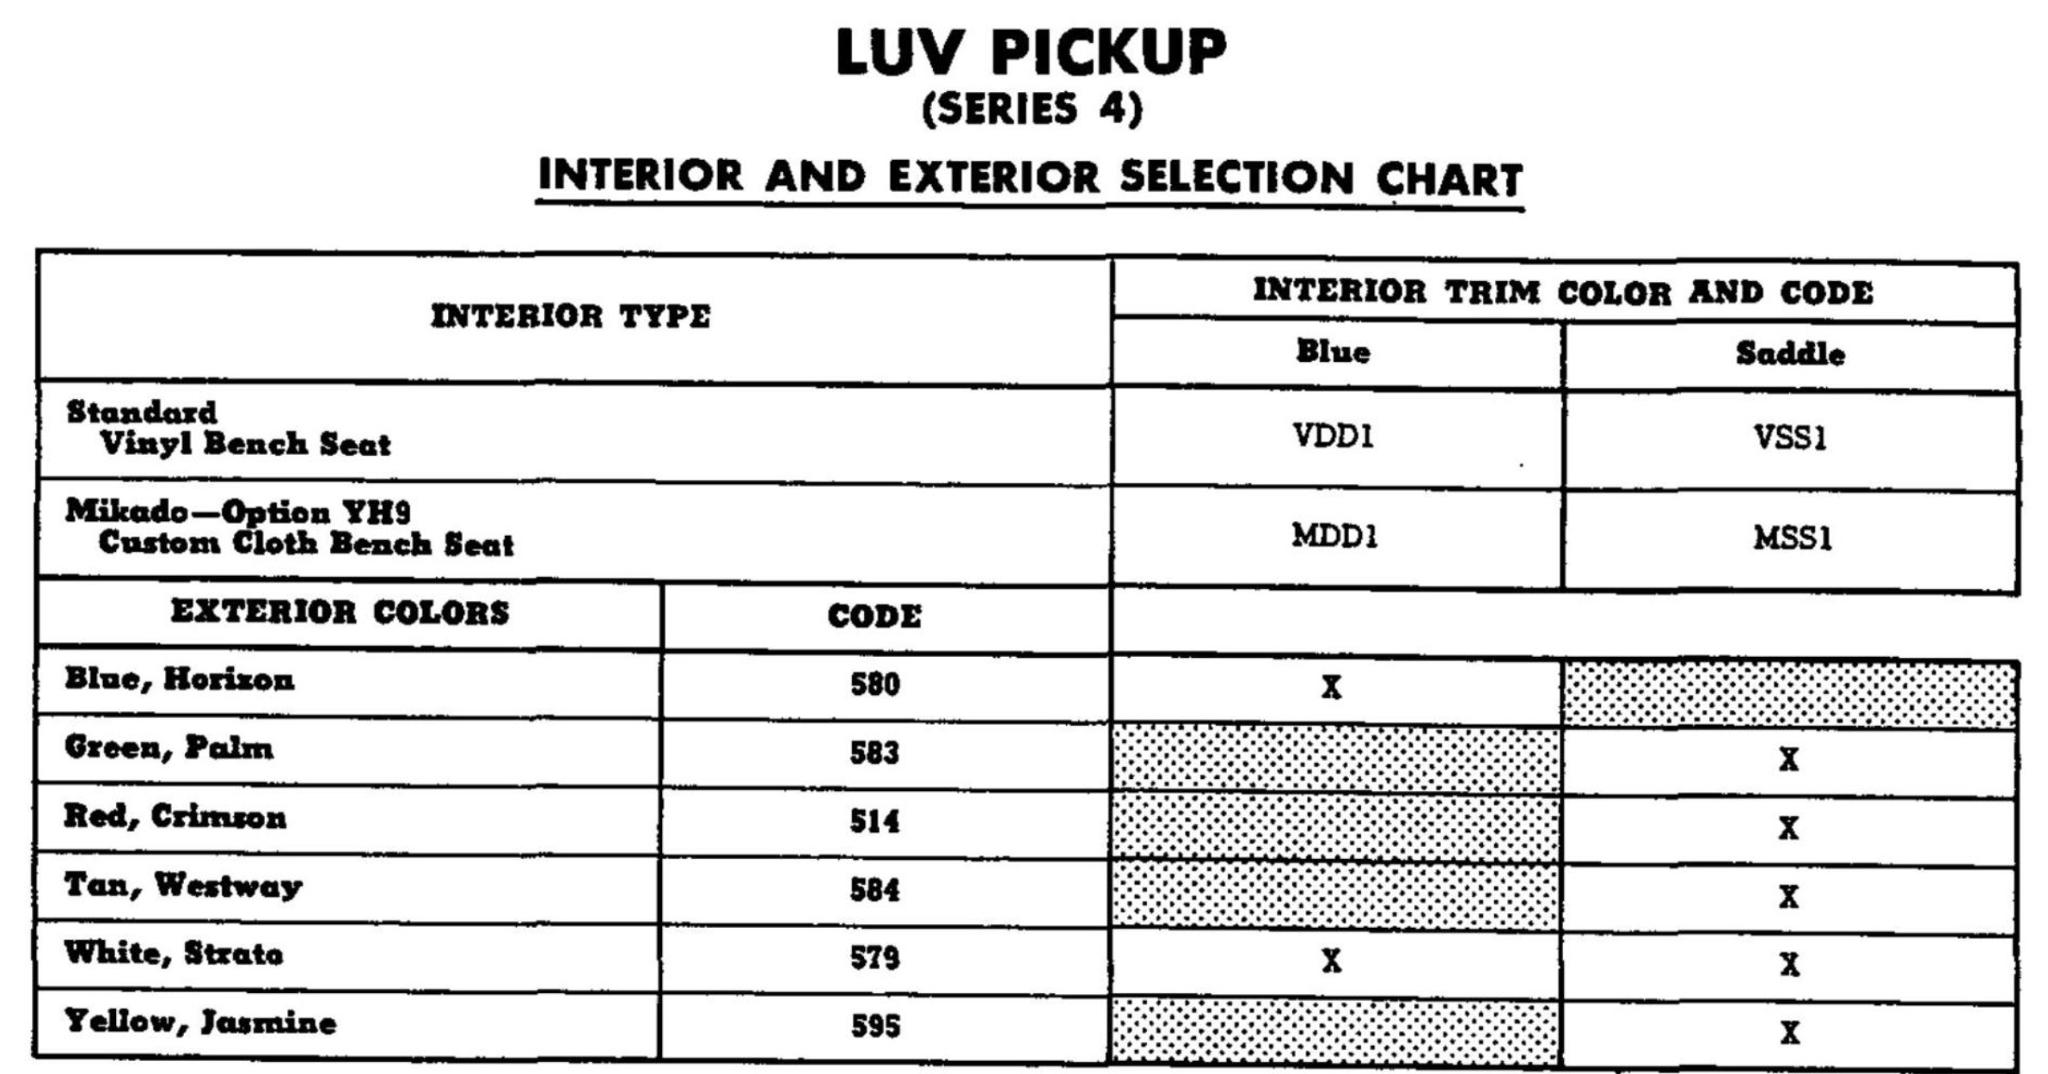 Colors for Luv in 1975